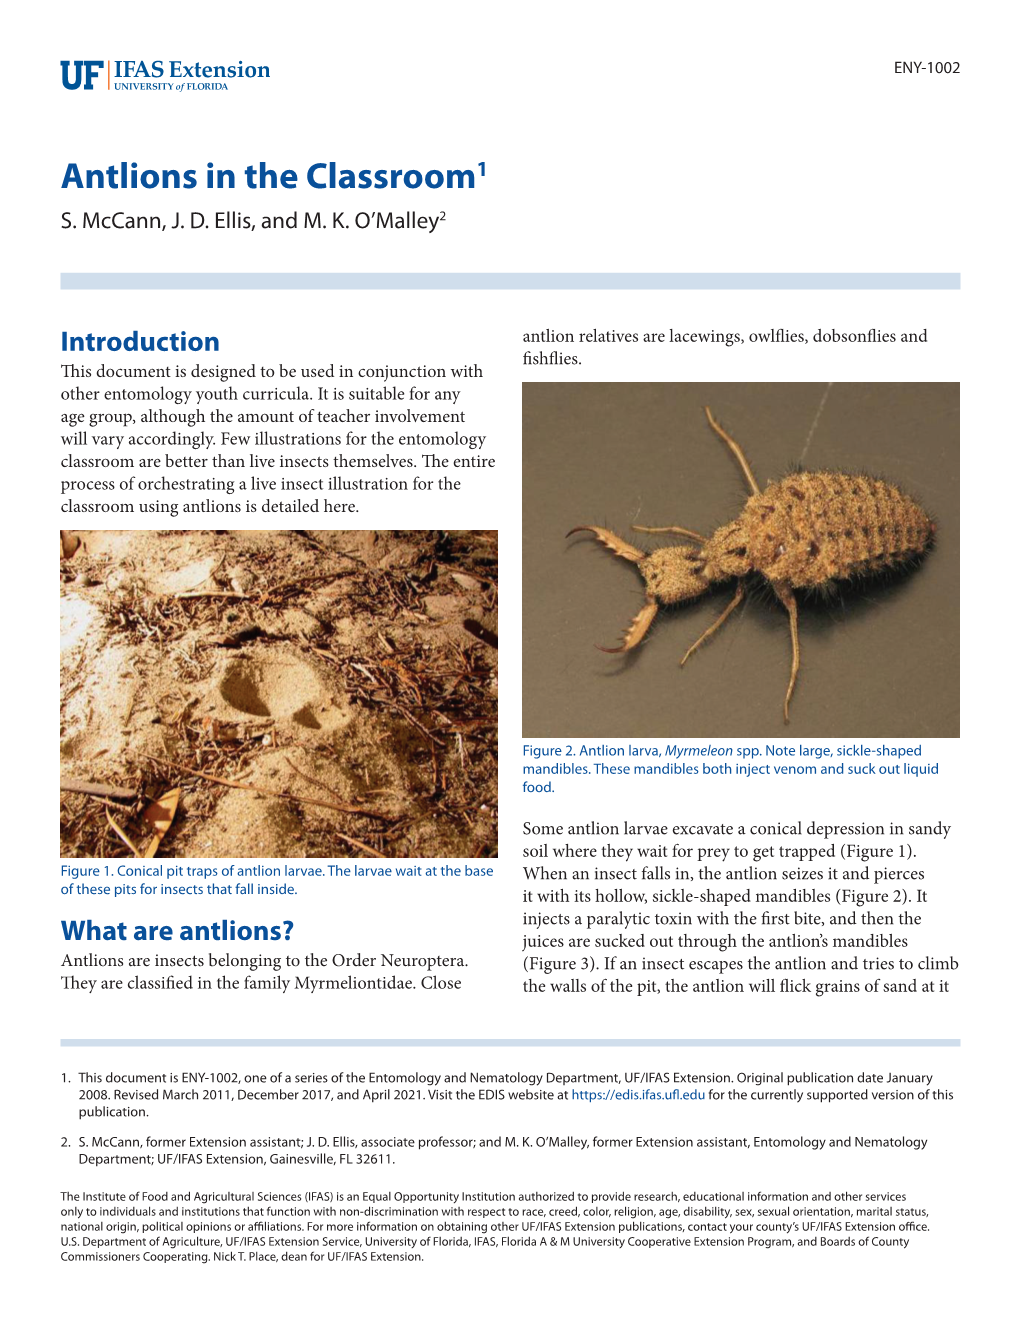 Antlions in the Classroom1 S